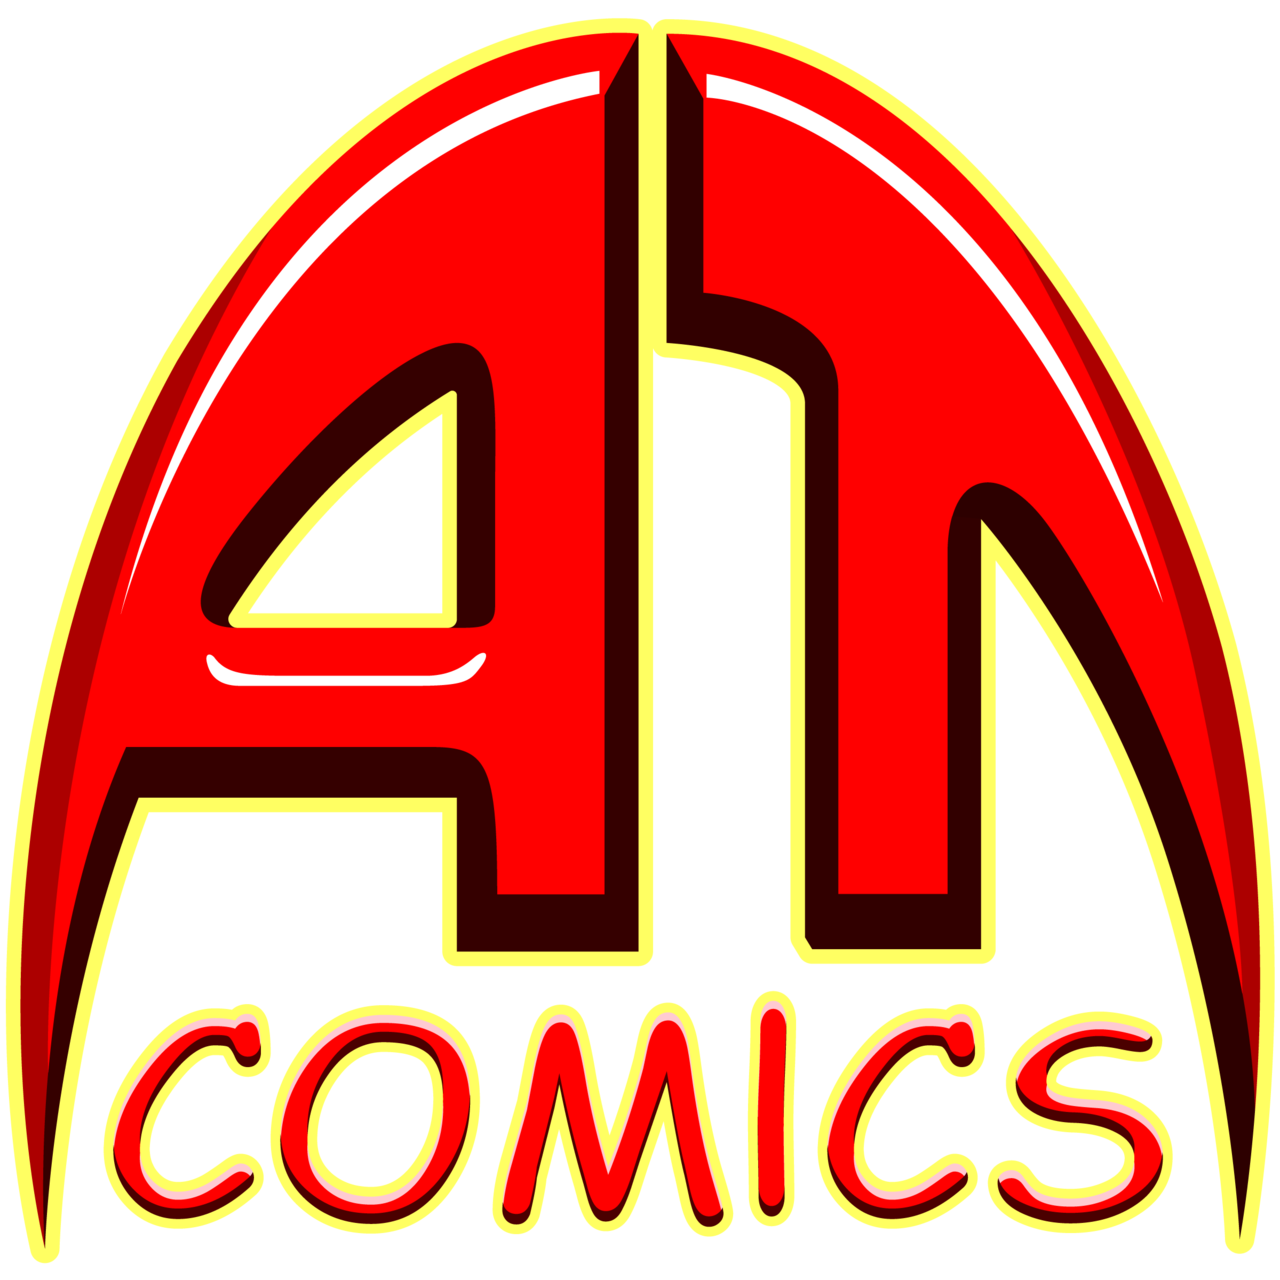 About Time Comics Newsletter